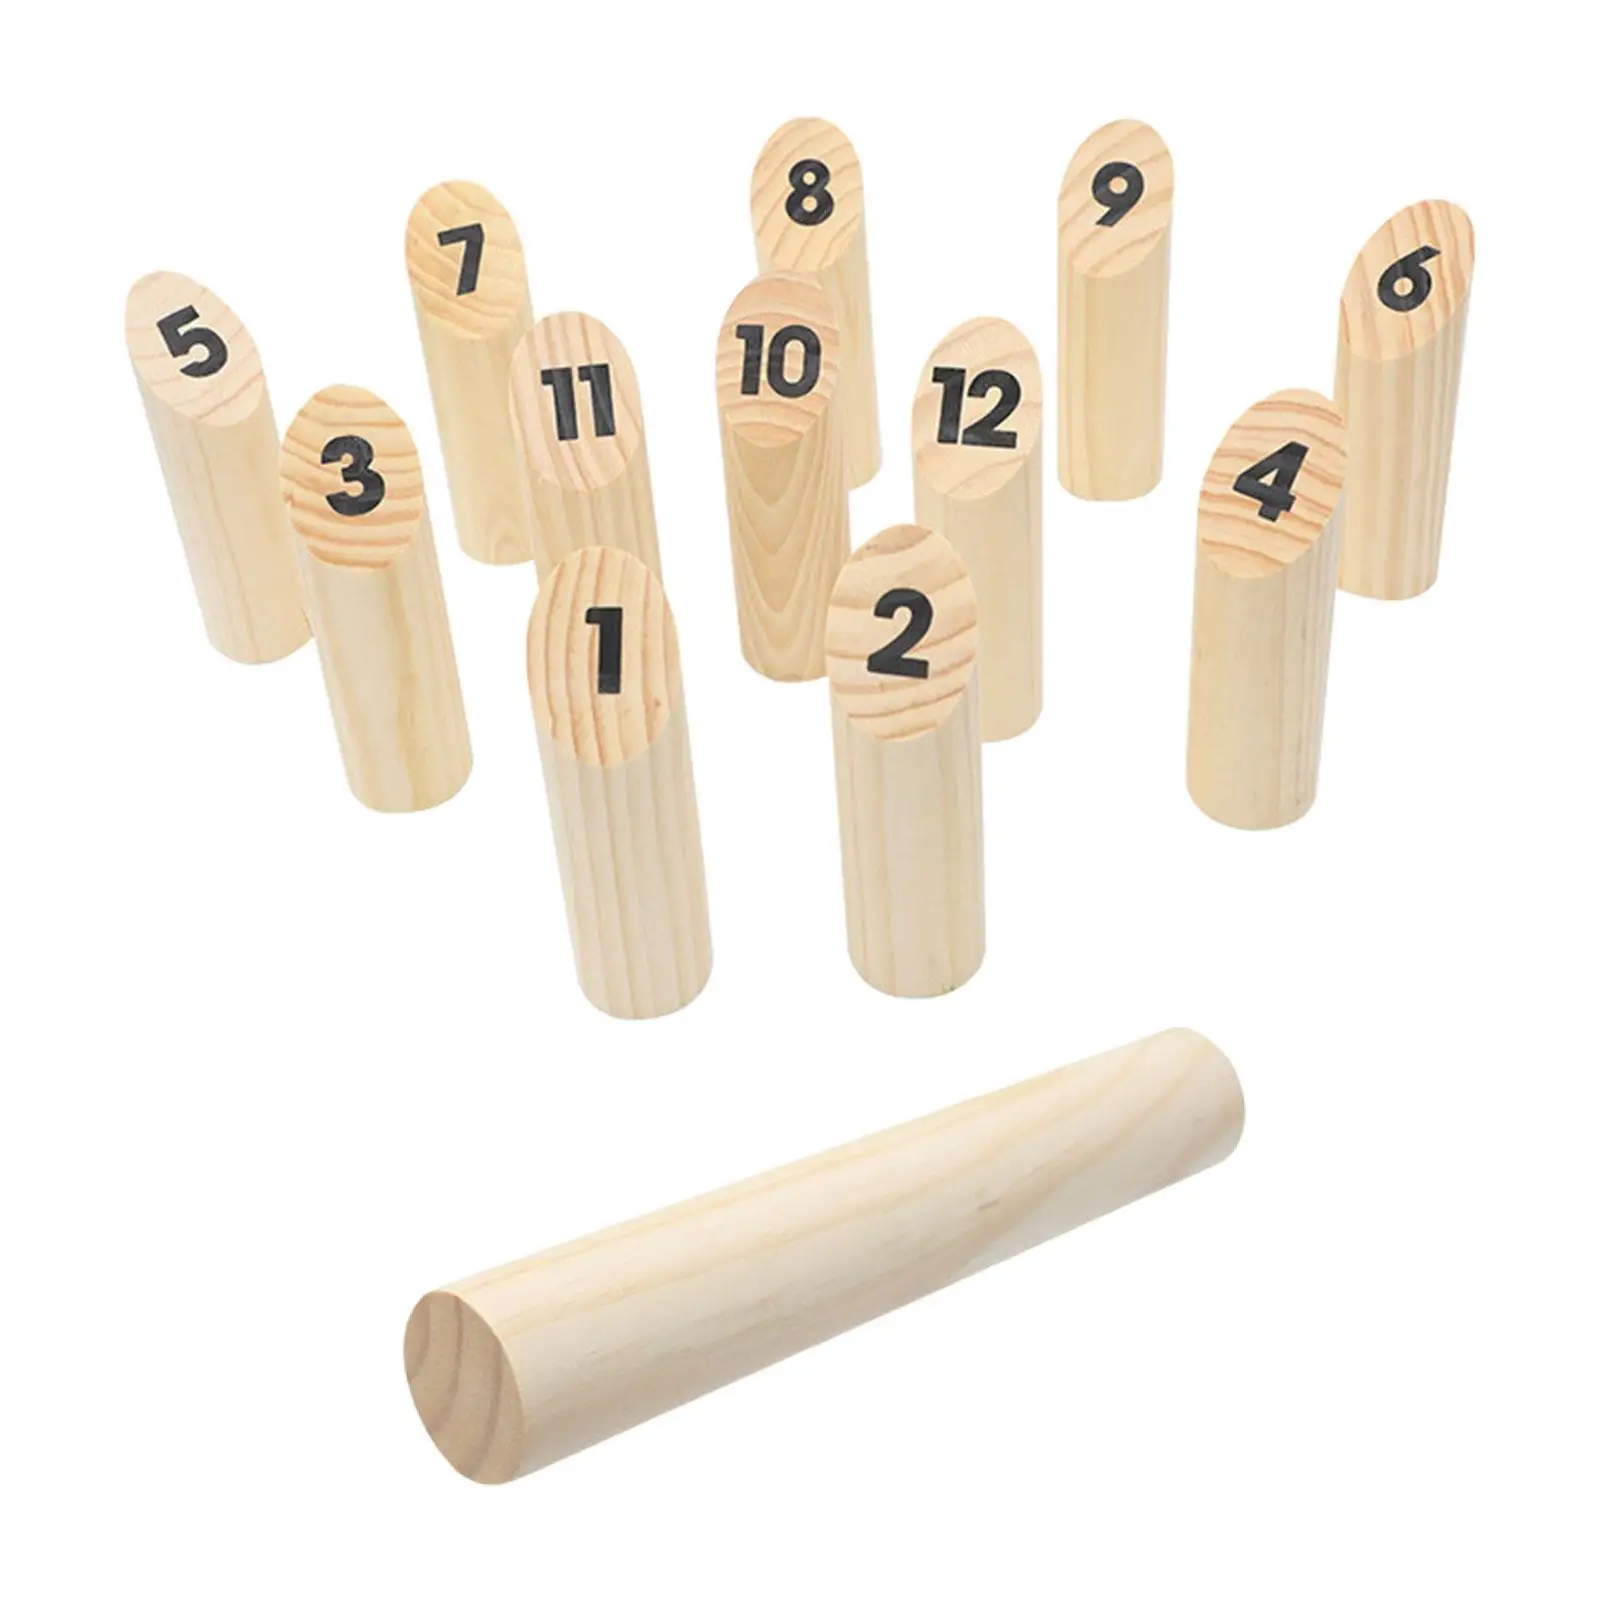 Wooden Tossing Game Throwing Dowel Throw Bowling Throwing Game Family Game Yard Game for Playground Backyard Picnic Outdoor Lawn